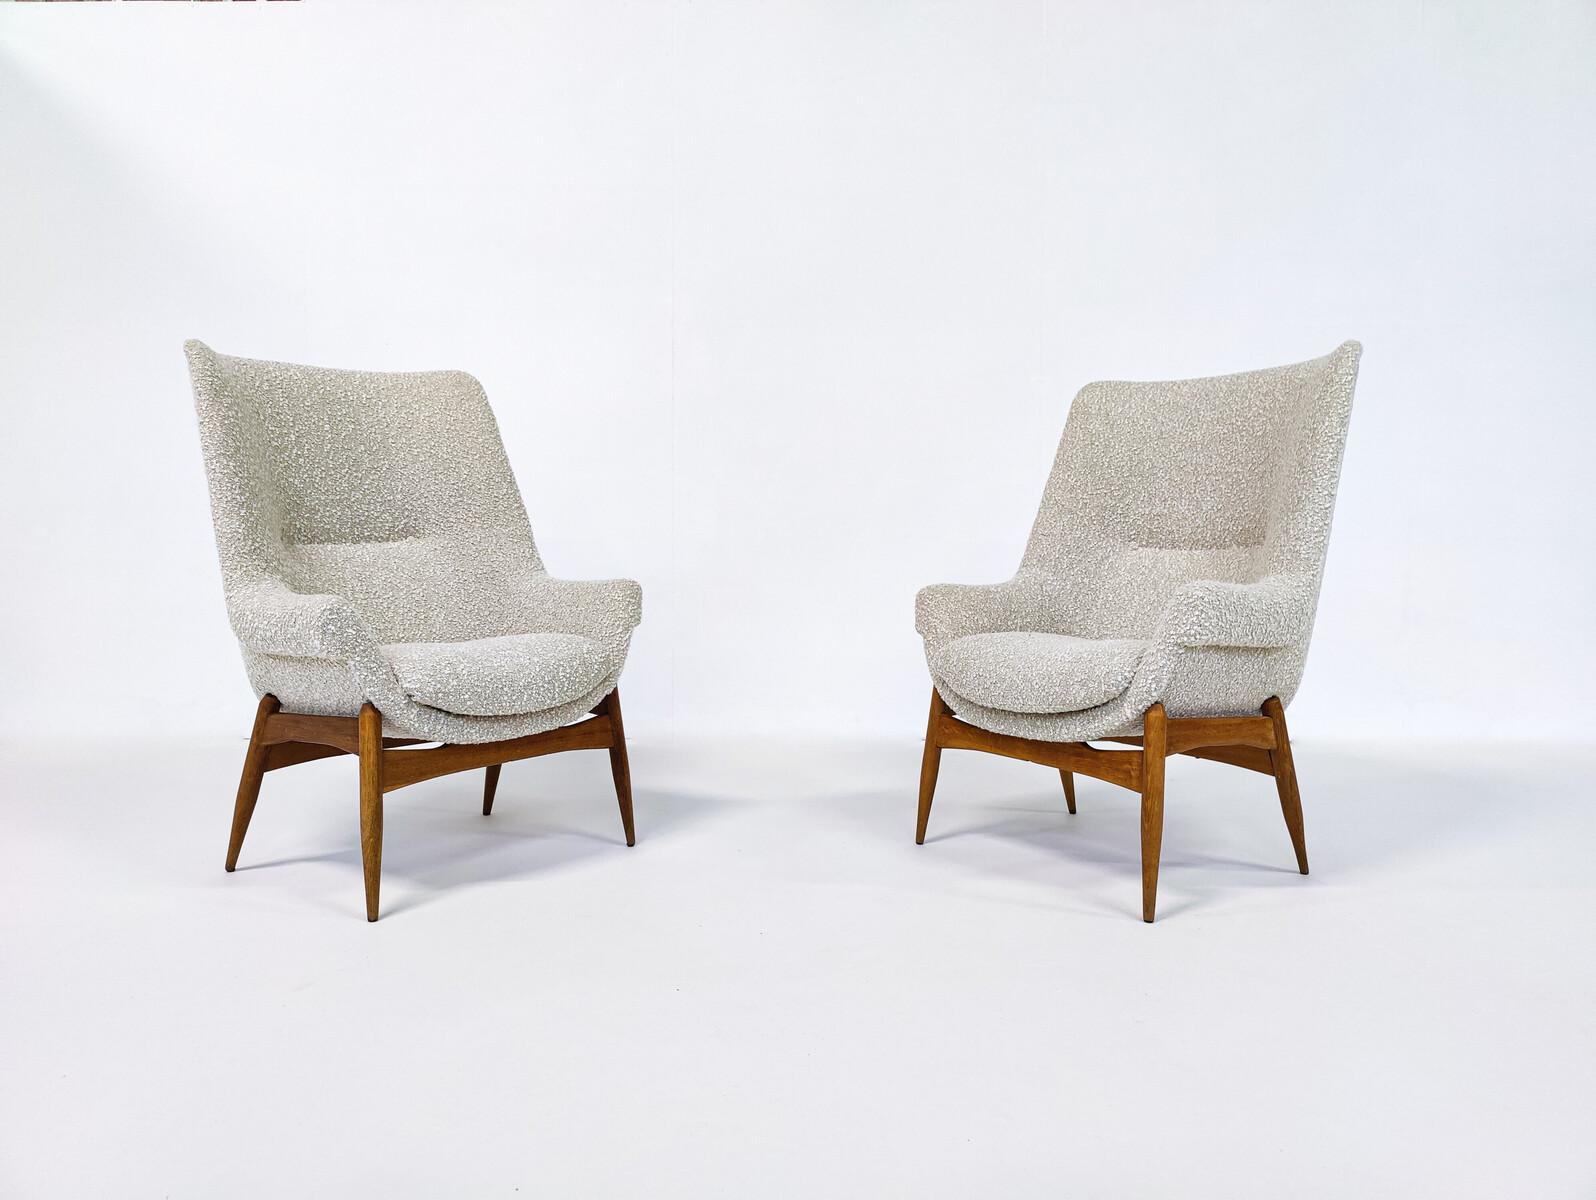 Mid-20th Century Pair of Mid-Century Modern Beige Fabric Armchairs by Julia Gaubek, Hungary, 1950 For Sale